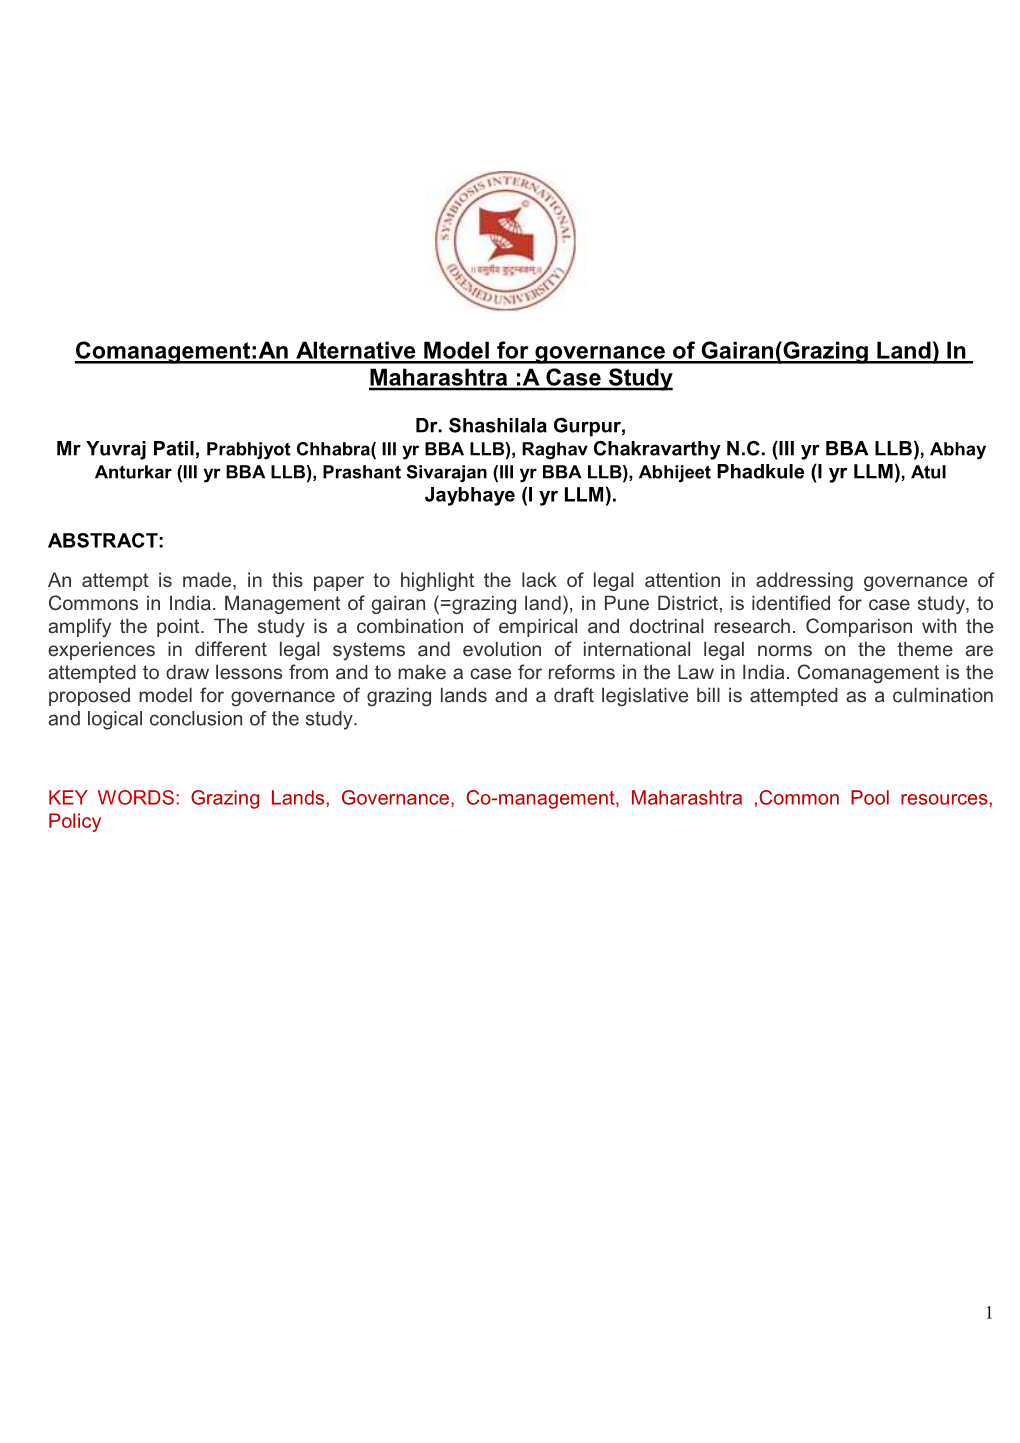 Comanagement:An Alternative Model for Governance of Gairan(Grazing Land) in Maharashtra :A Case Study